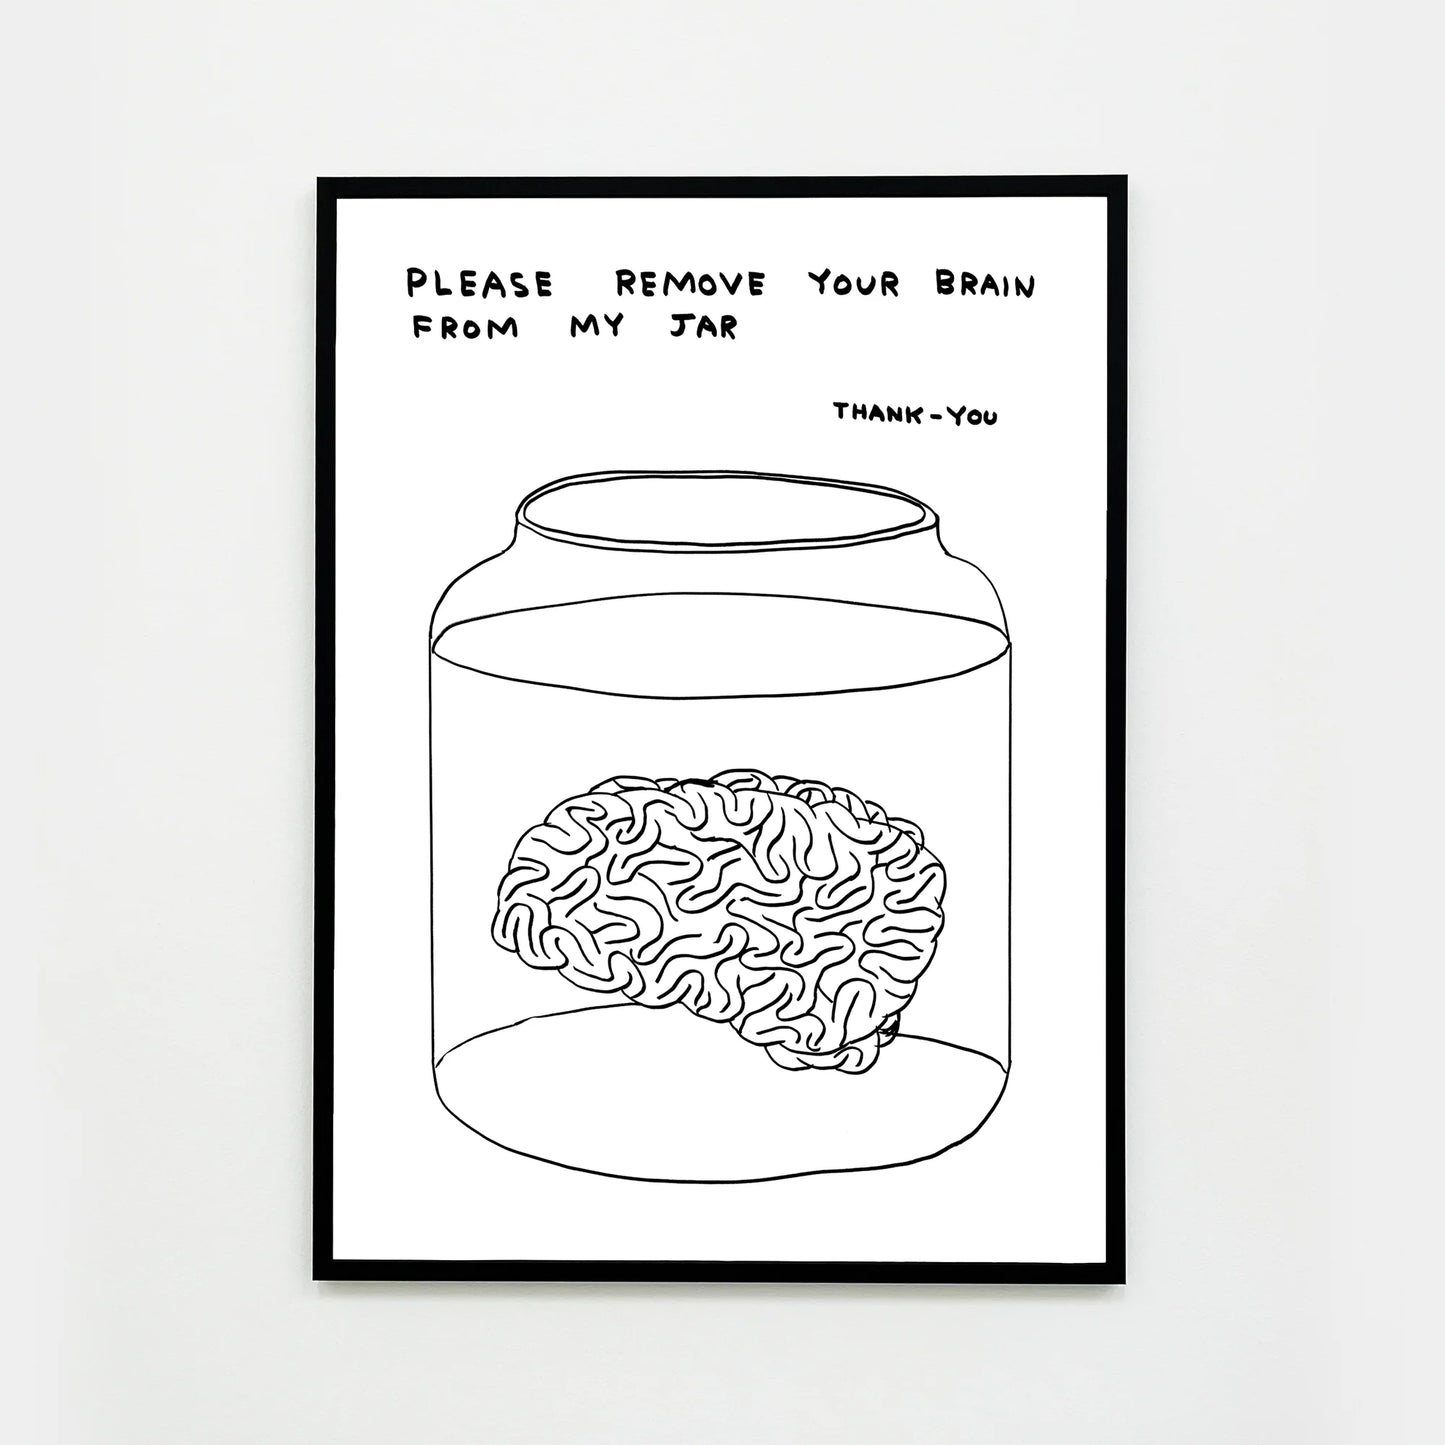 a photo of a david shrigley artwork titled 'please remove your brain from my jar' in a black frame. the artwork features a white background, with a black line drawing of a brain in a jar of liquid, with text above stating 'please remove your brain from my jar tjank-you' in all caps. this is a david shrigley print for sale